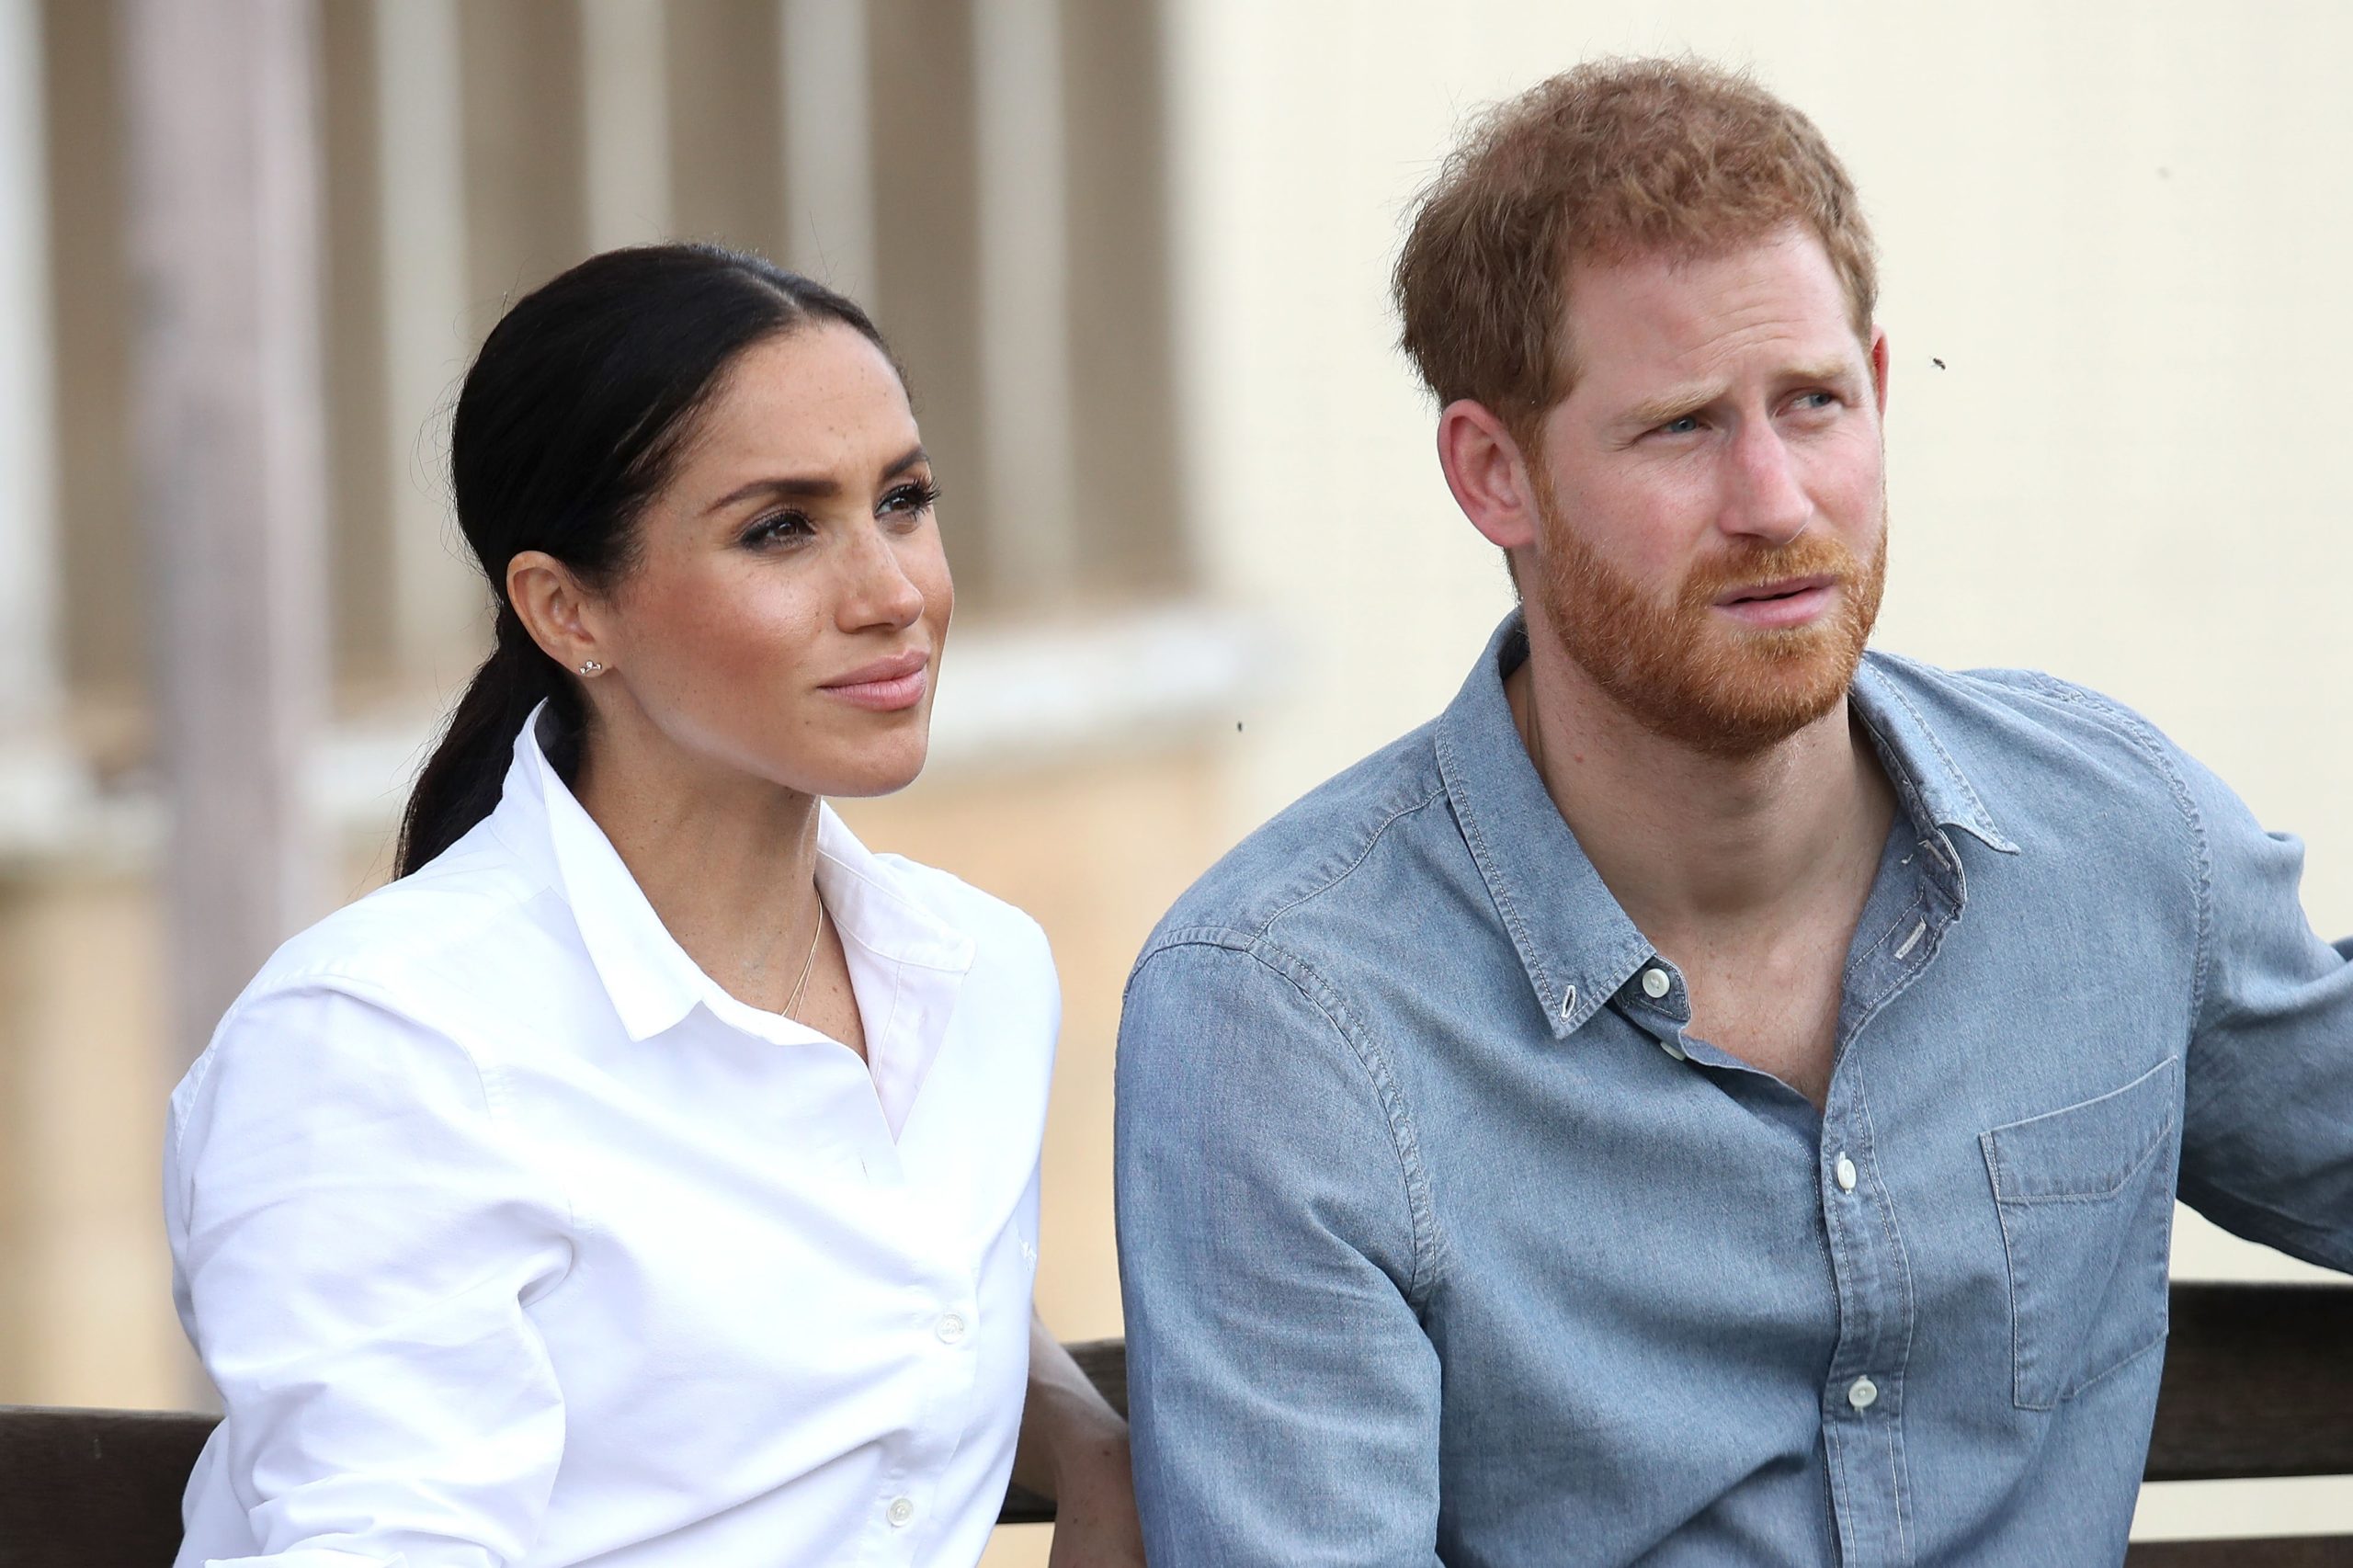 Prince Harry And Meghan Markle Are Banned From Entering The Palace By Queen Elizabeth? Royal Family Update